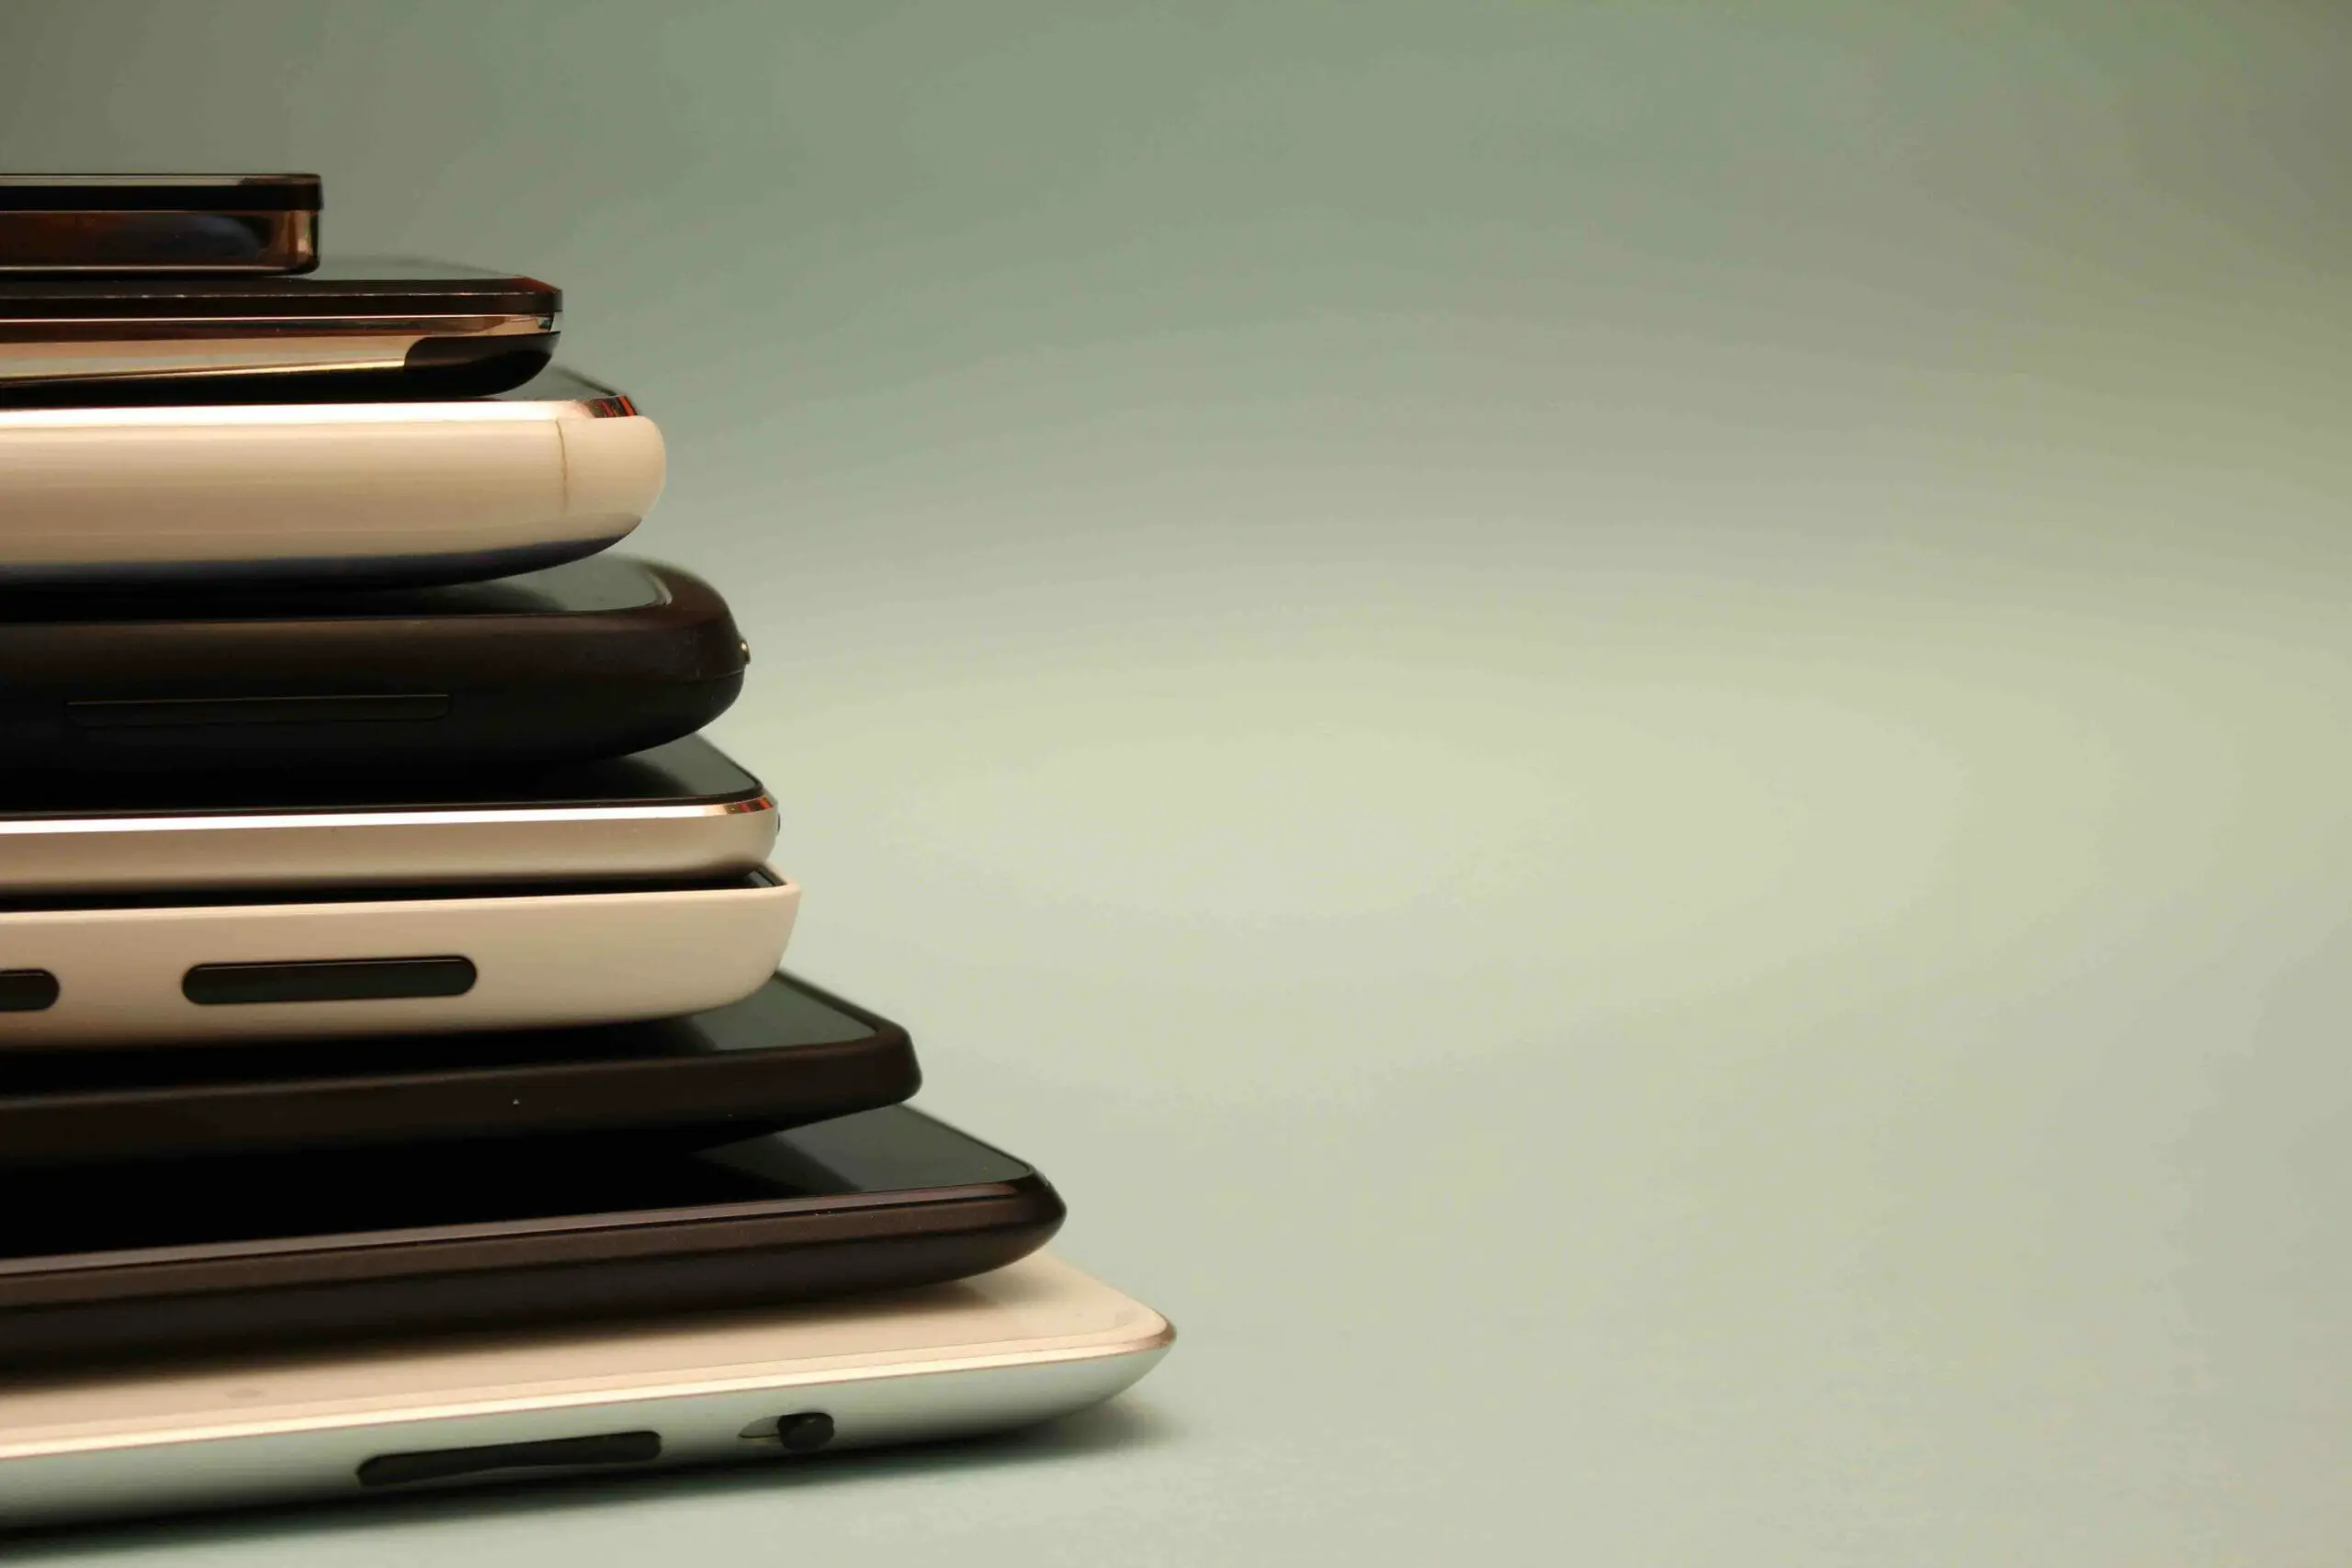 A pile of different phones in a grey-green background